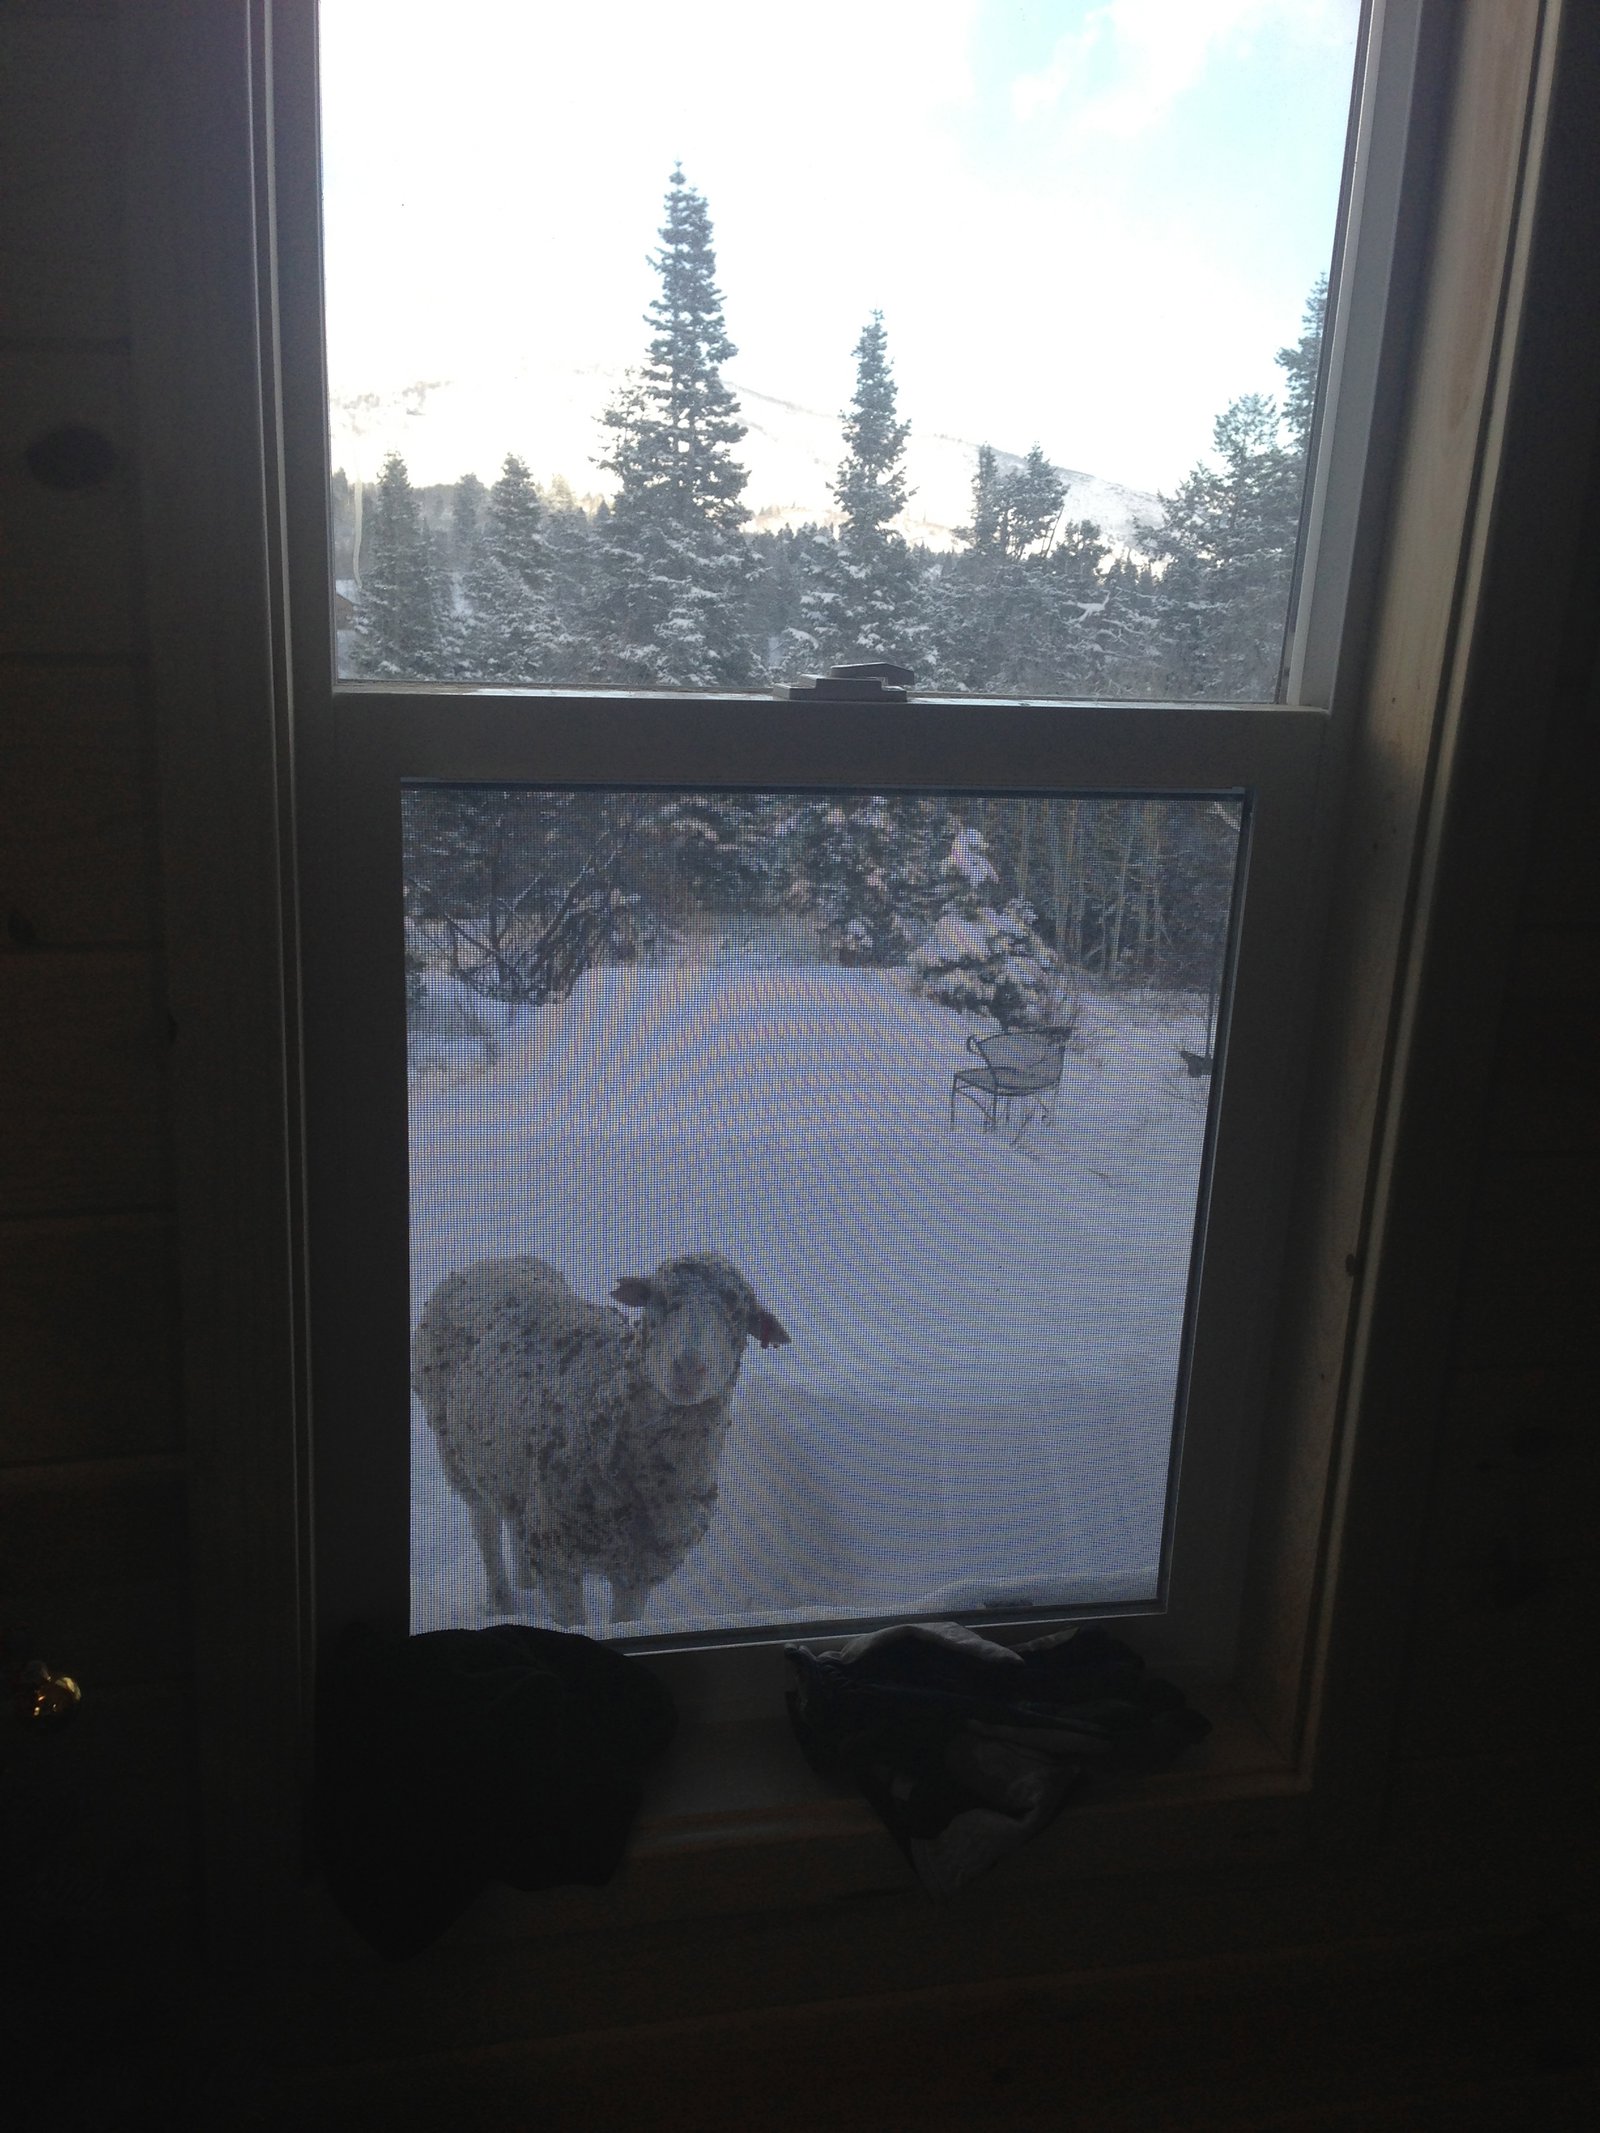 a sheep was looking into my window...